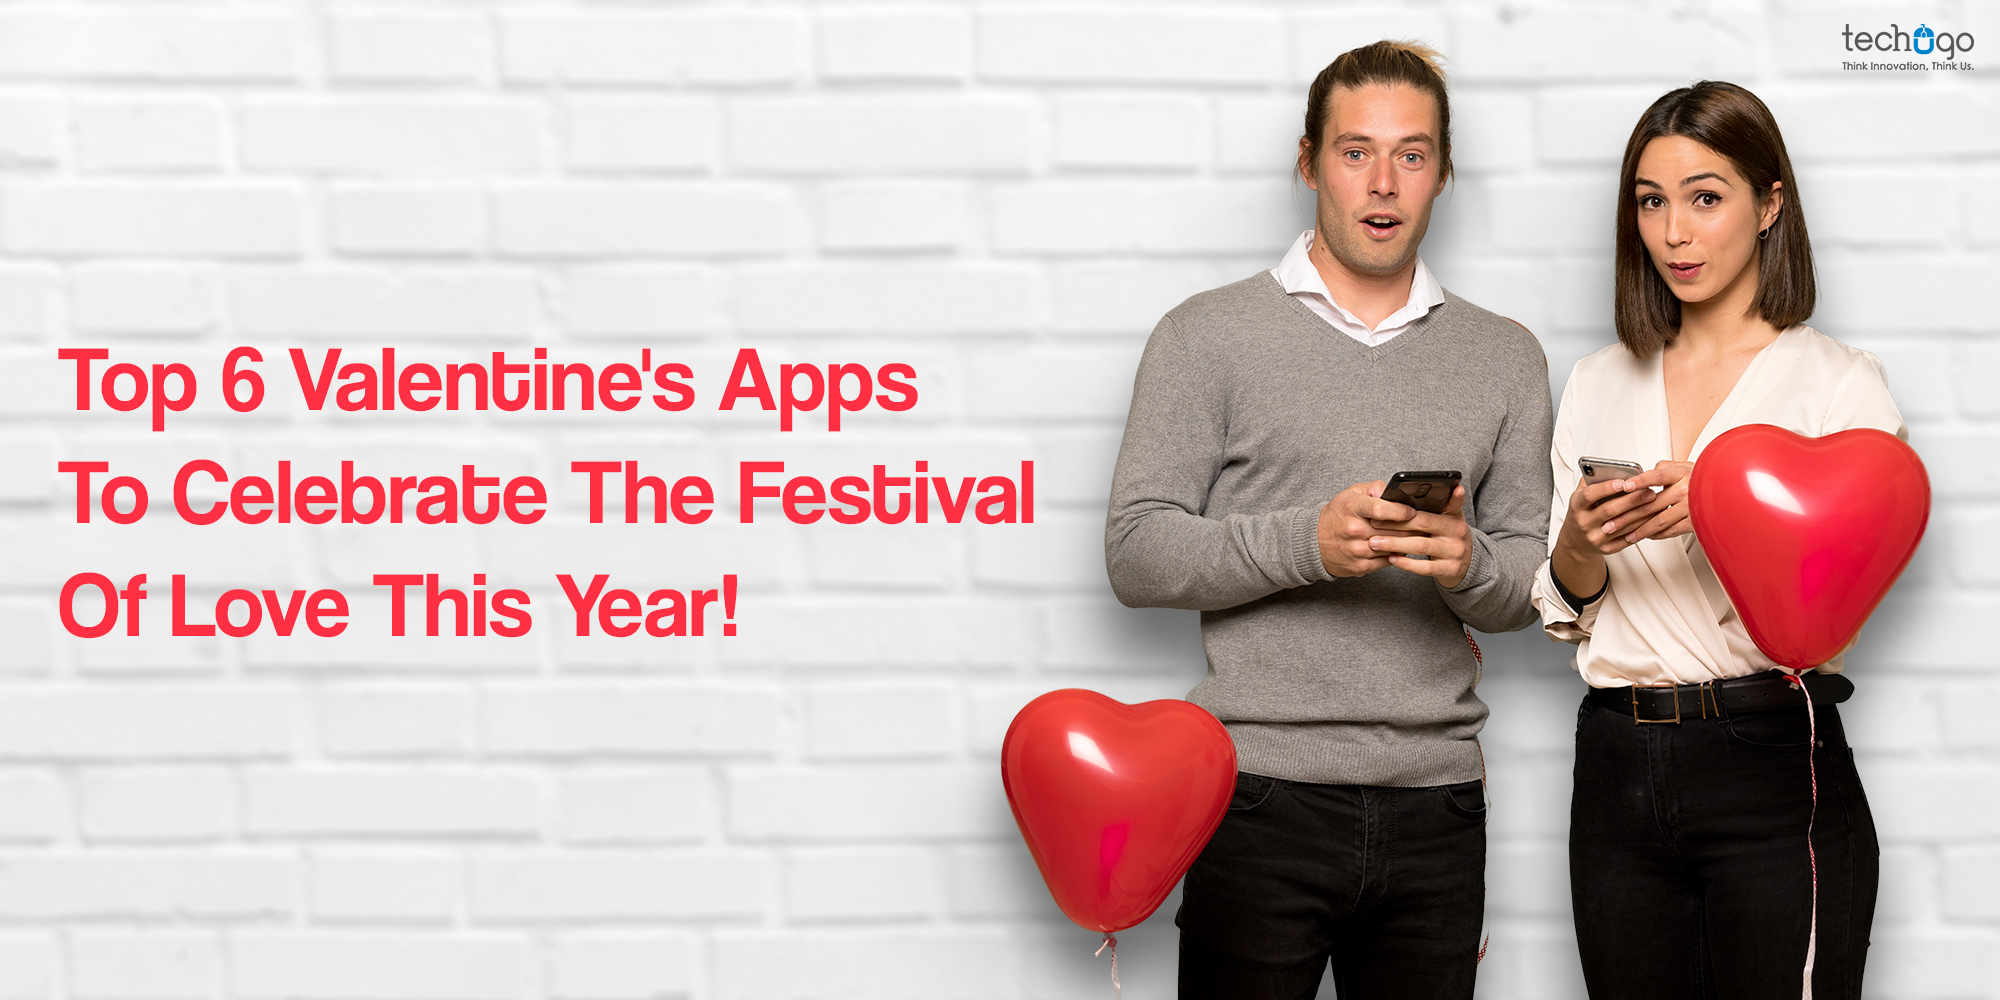 Top 6 Valentine’s Apps To Celebrate The Festival Of Love This Year!